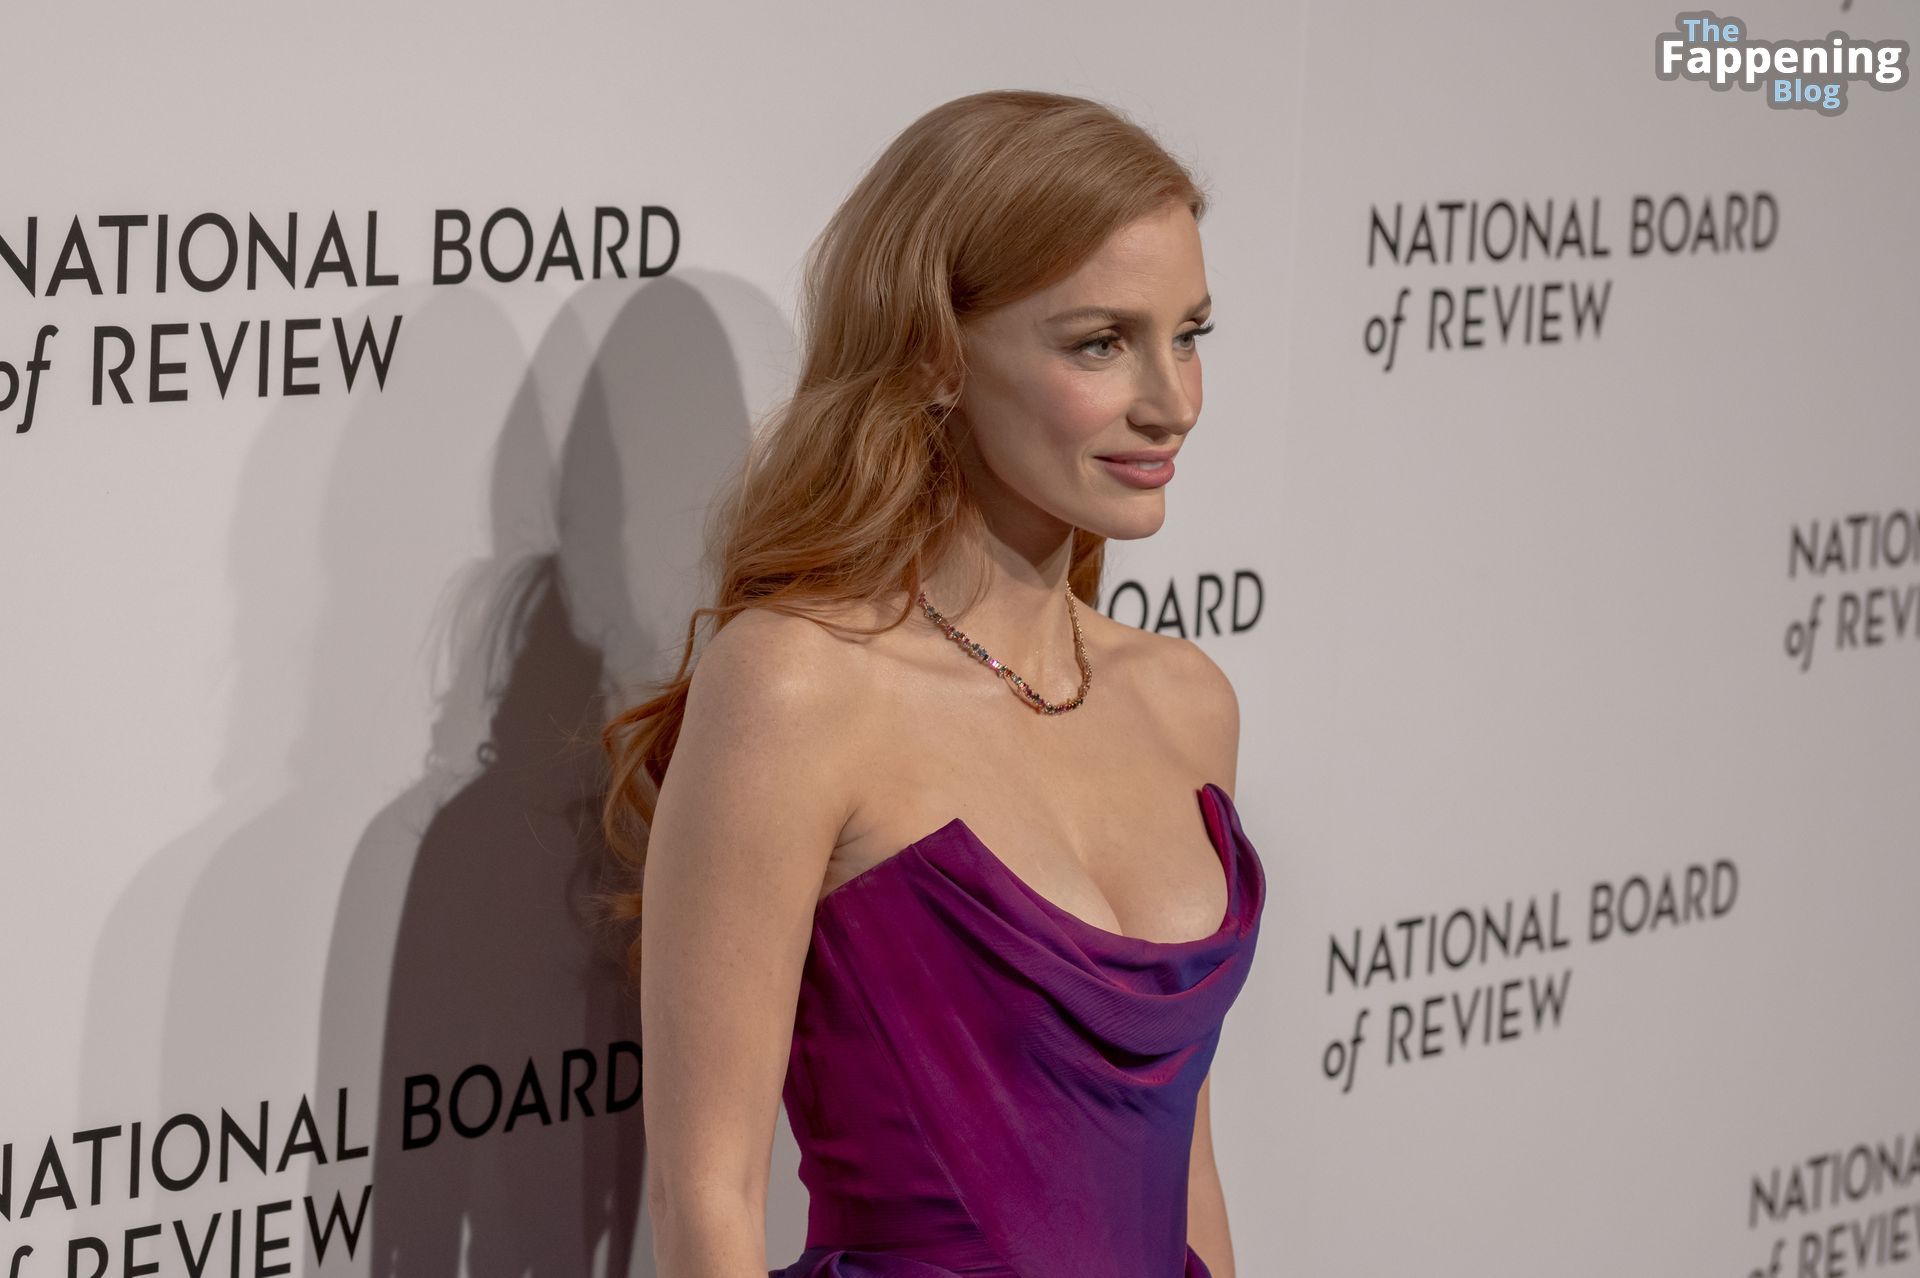 Jessica-Chastain-Sexy-22-The-Fappening-Blog-1.jpg